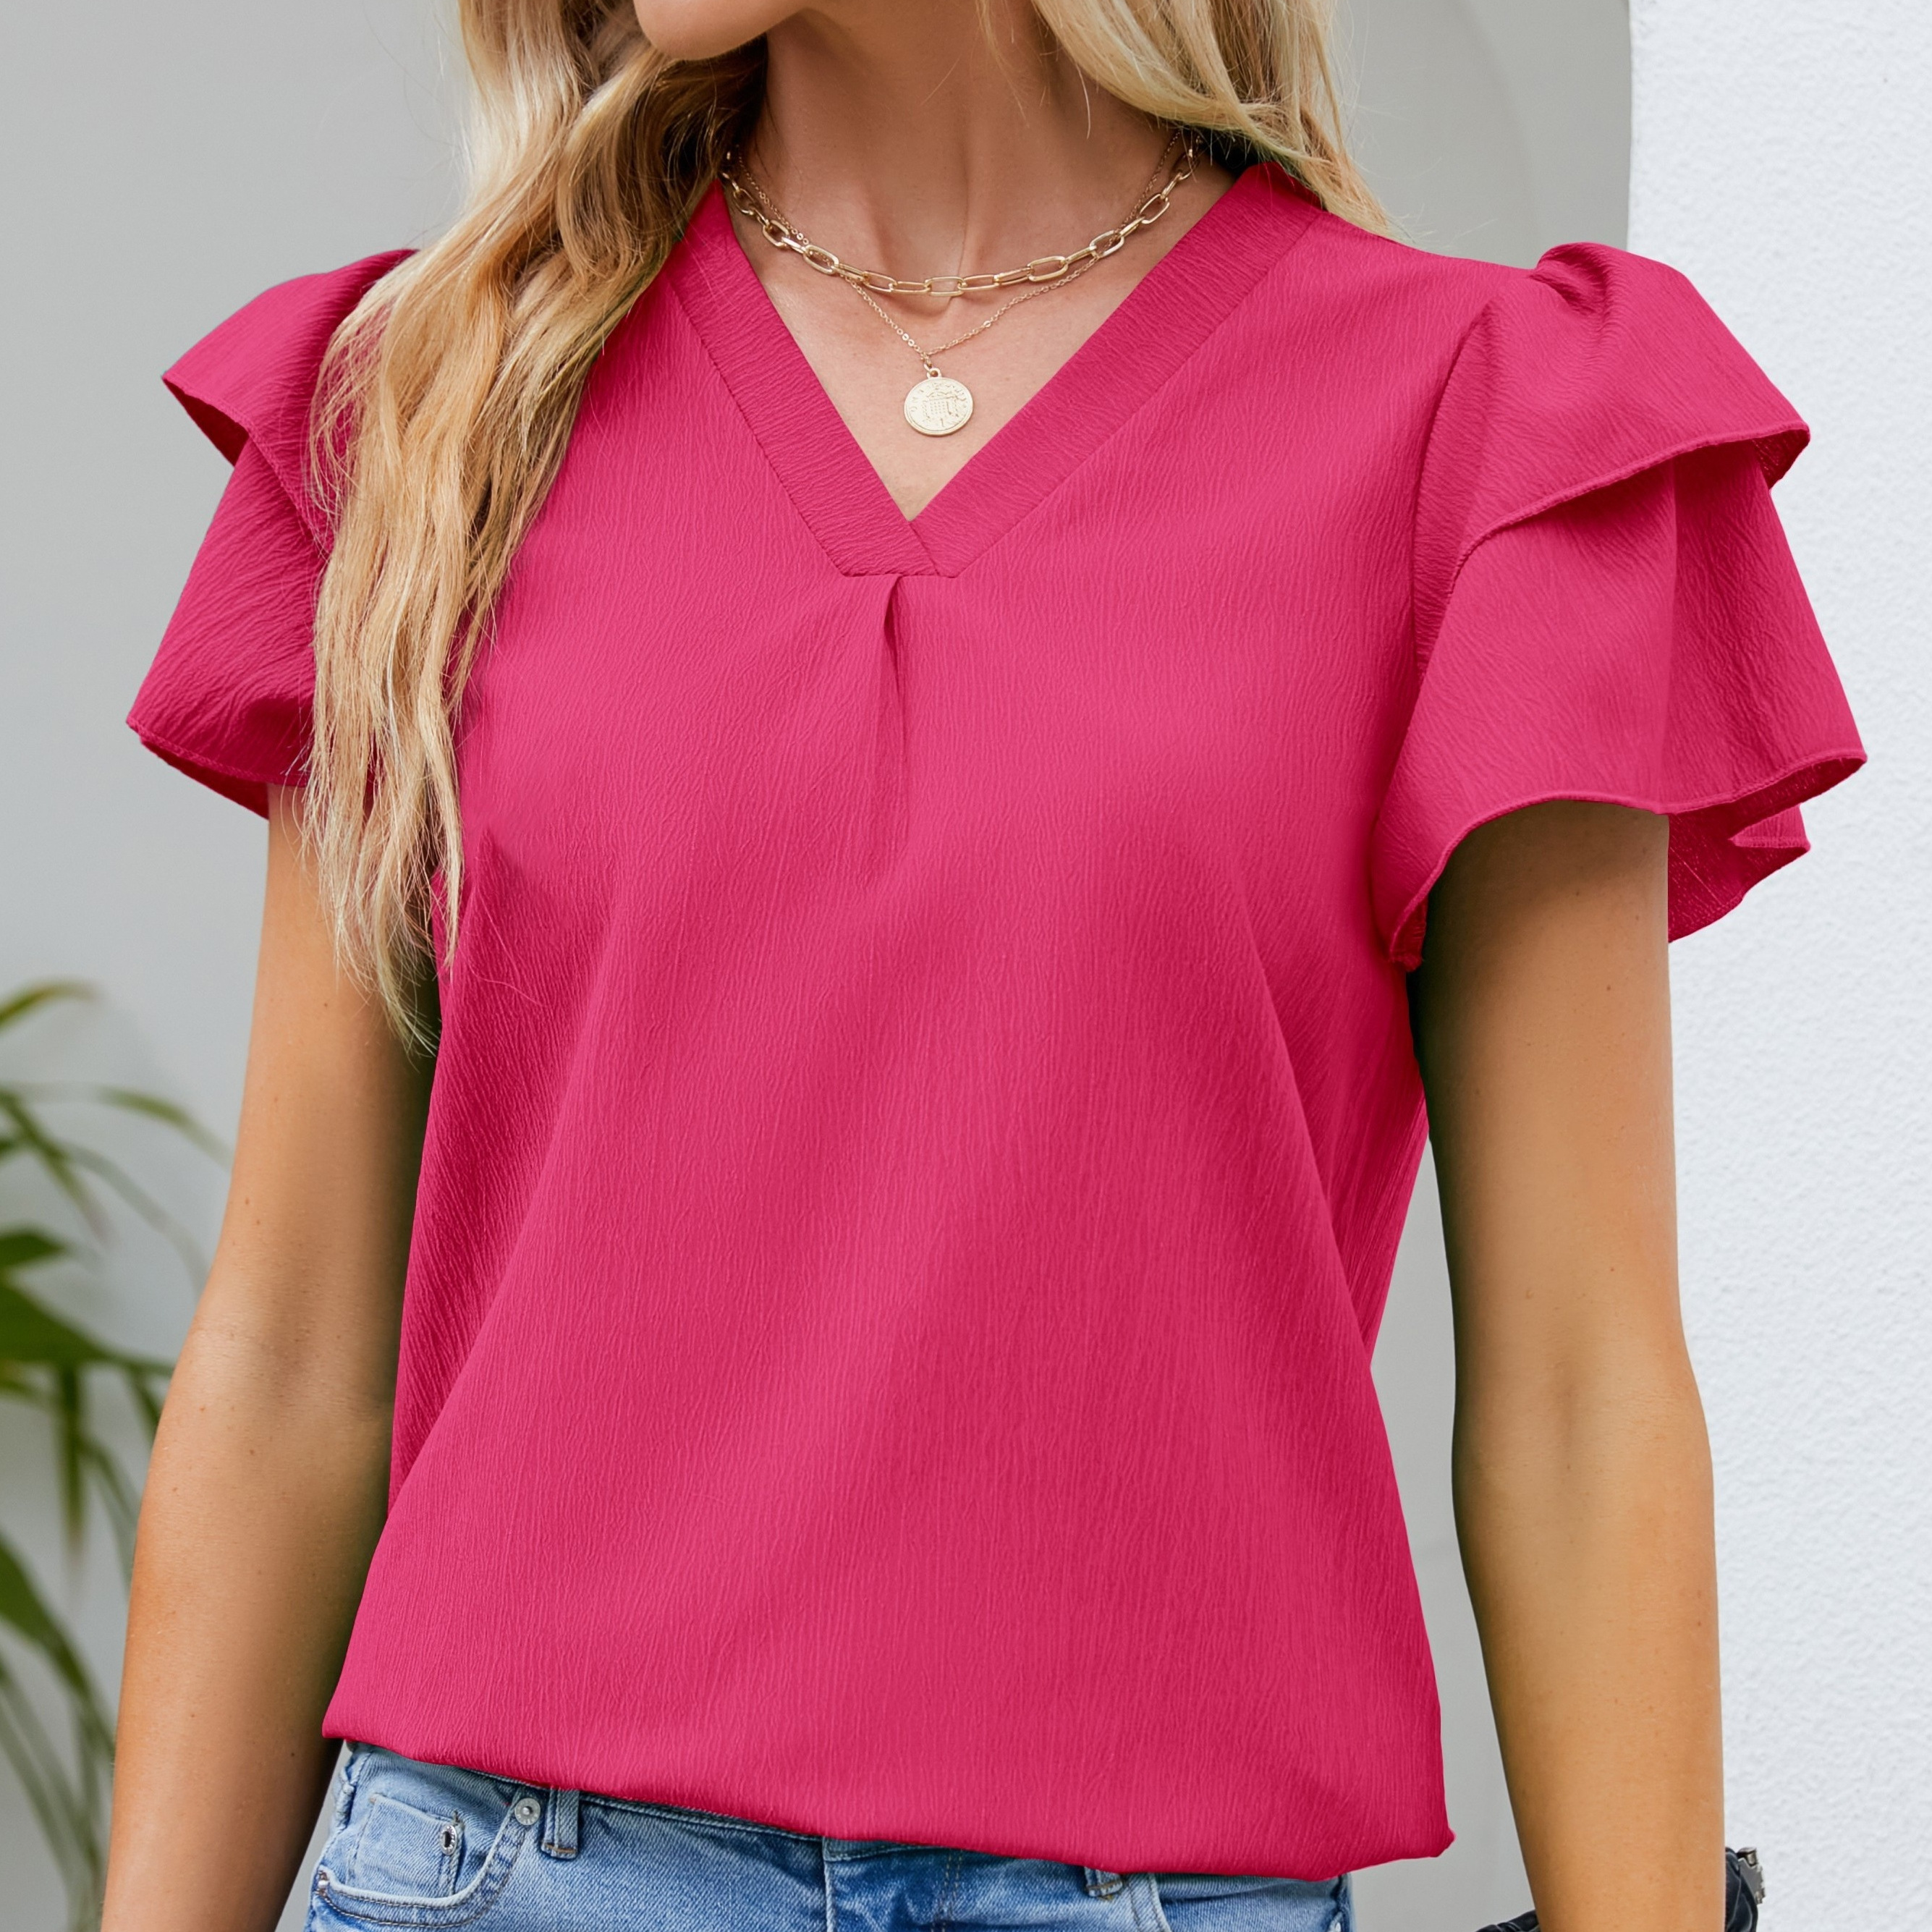 

Ruffle Trim Solid Blouse, Casual V Neck Layered Comfy Short Sleeve Blouse, Women's Clothing